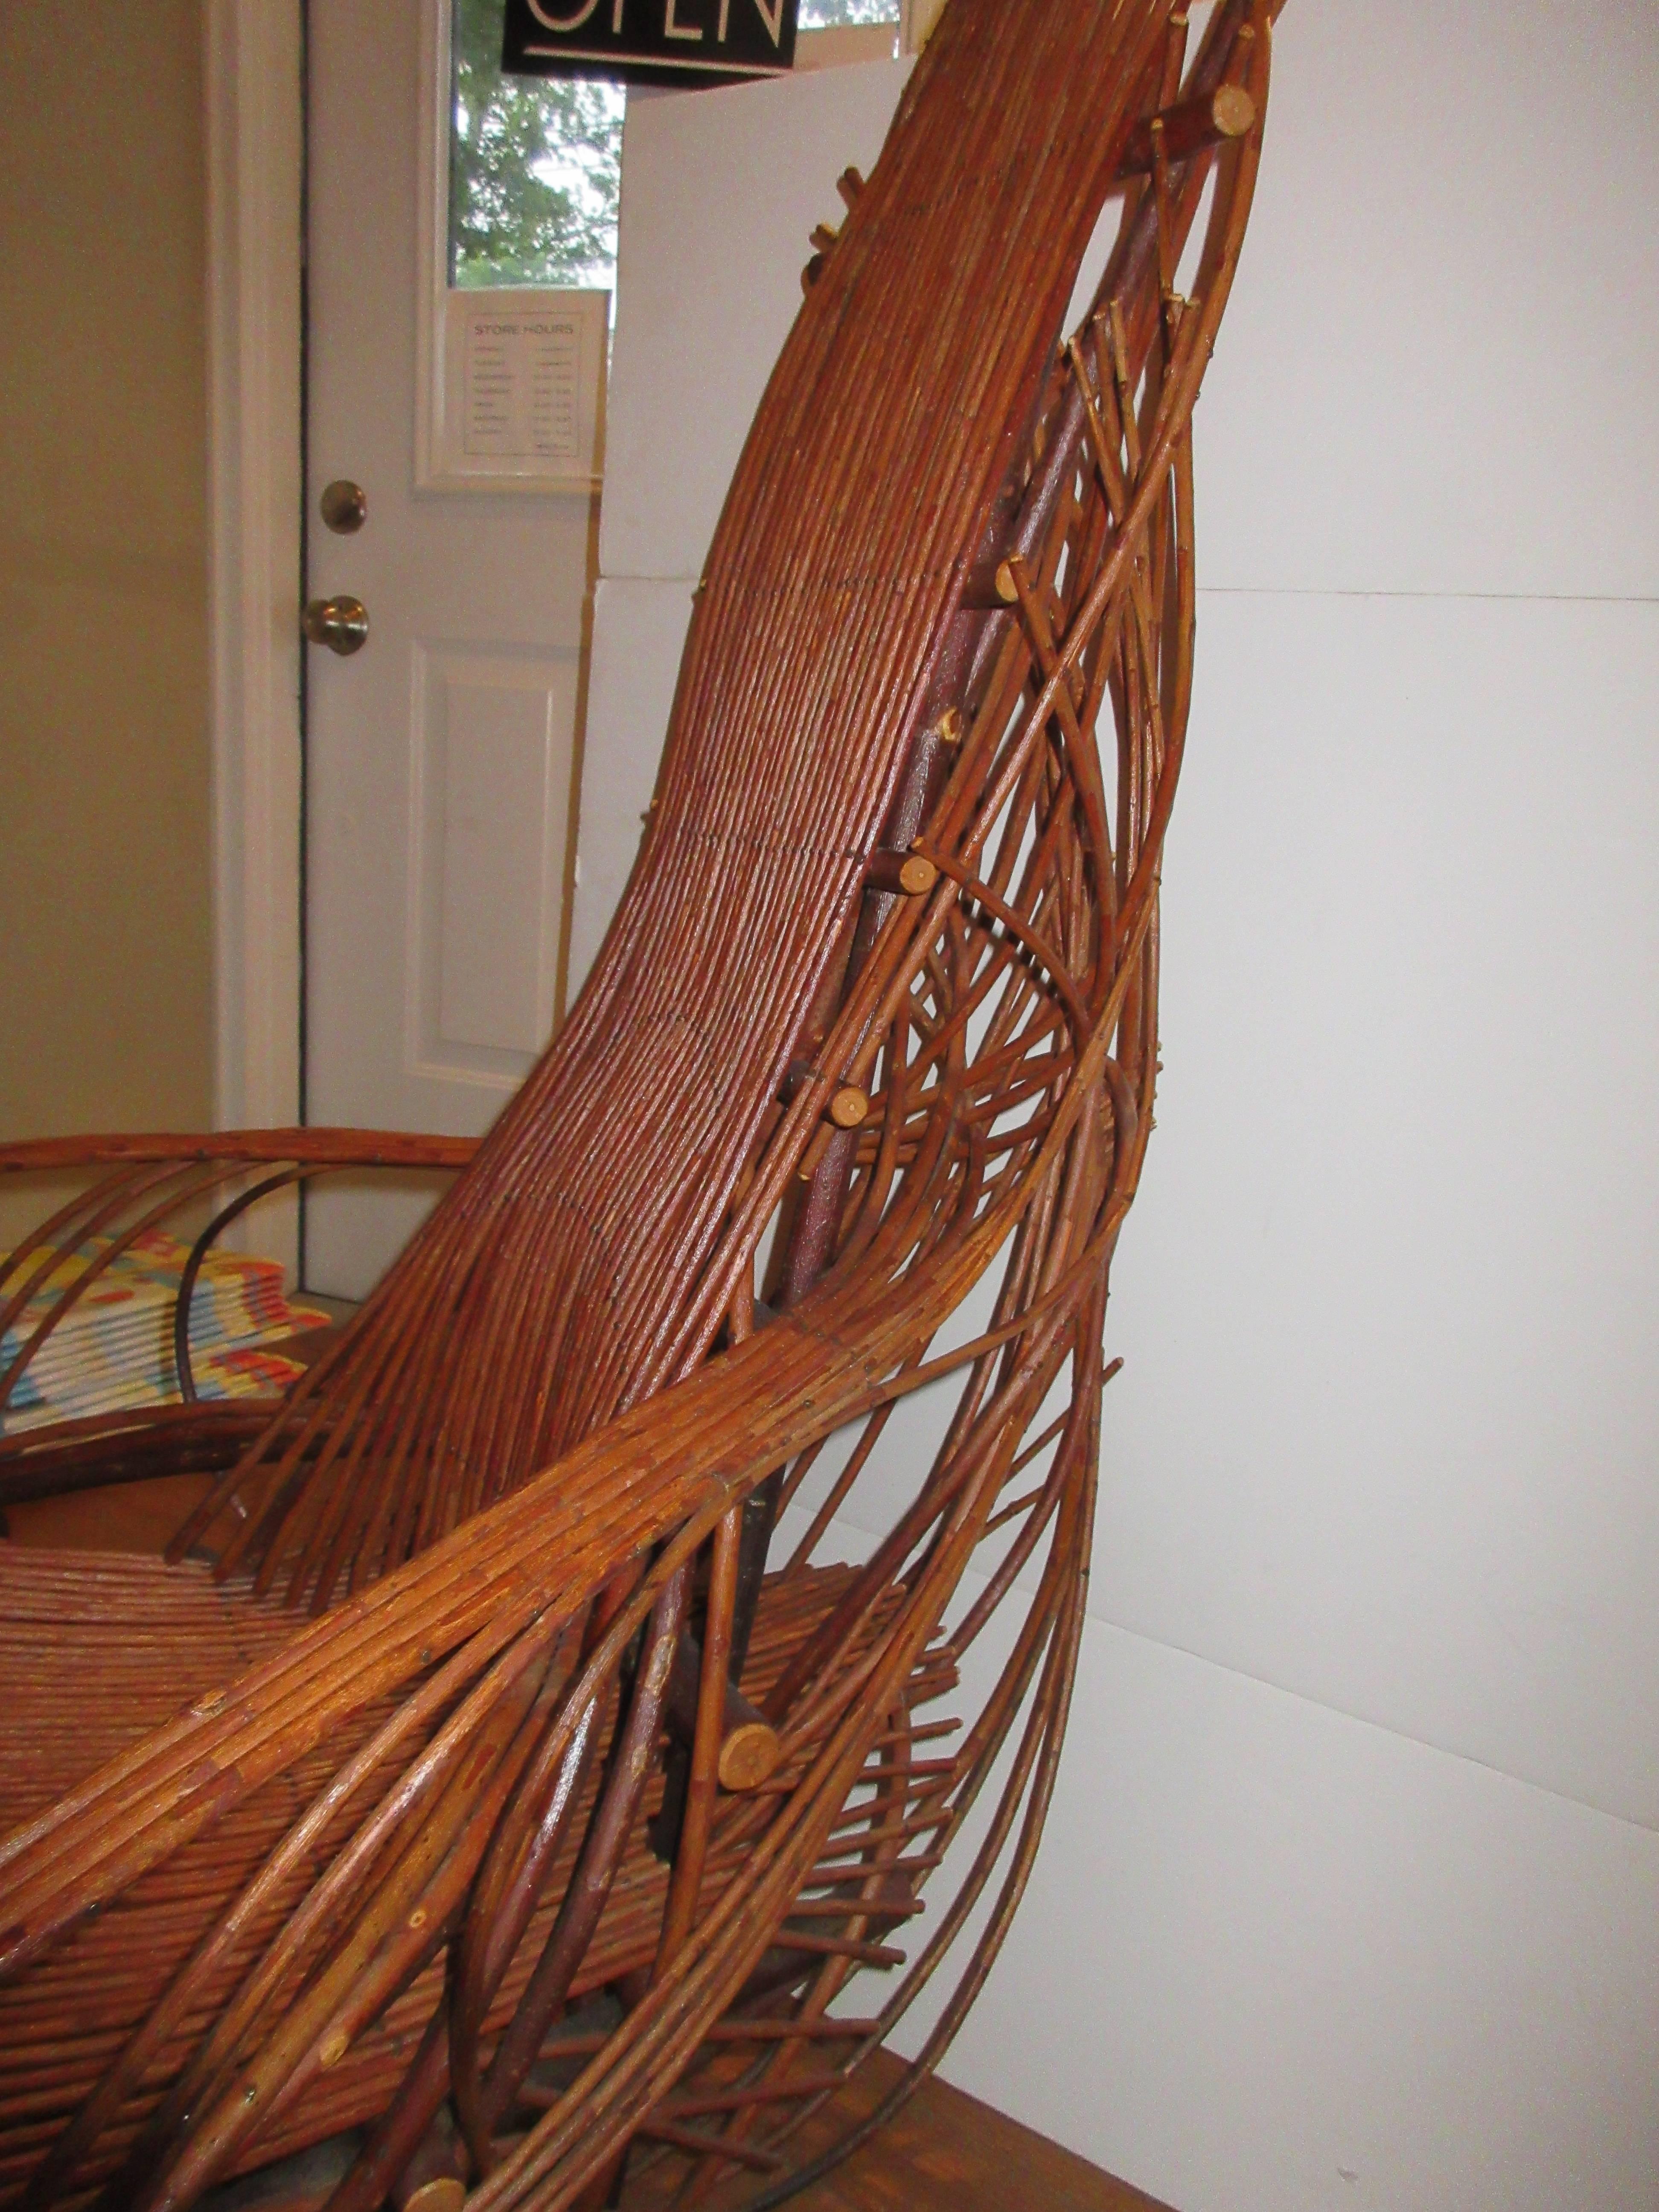 A Clfton Monteith twisted willow armchair, perfectly handcrafted with the most impeccable details.